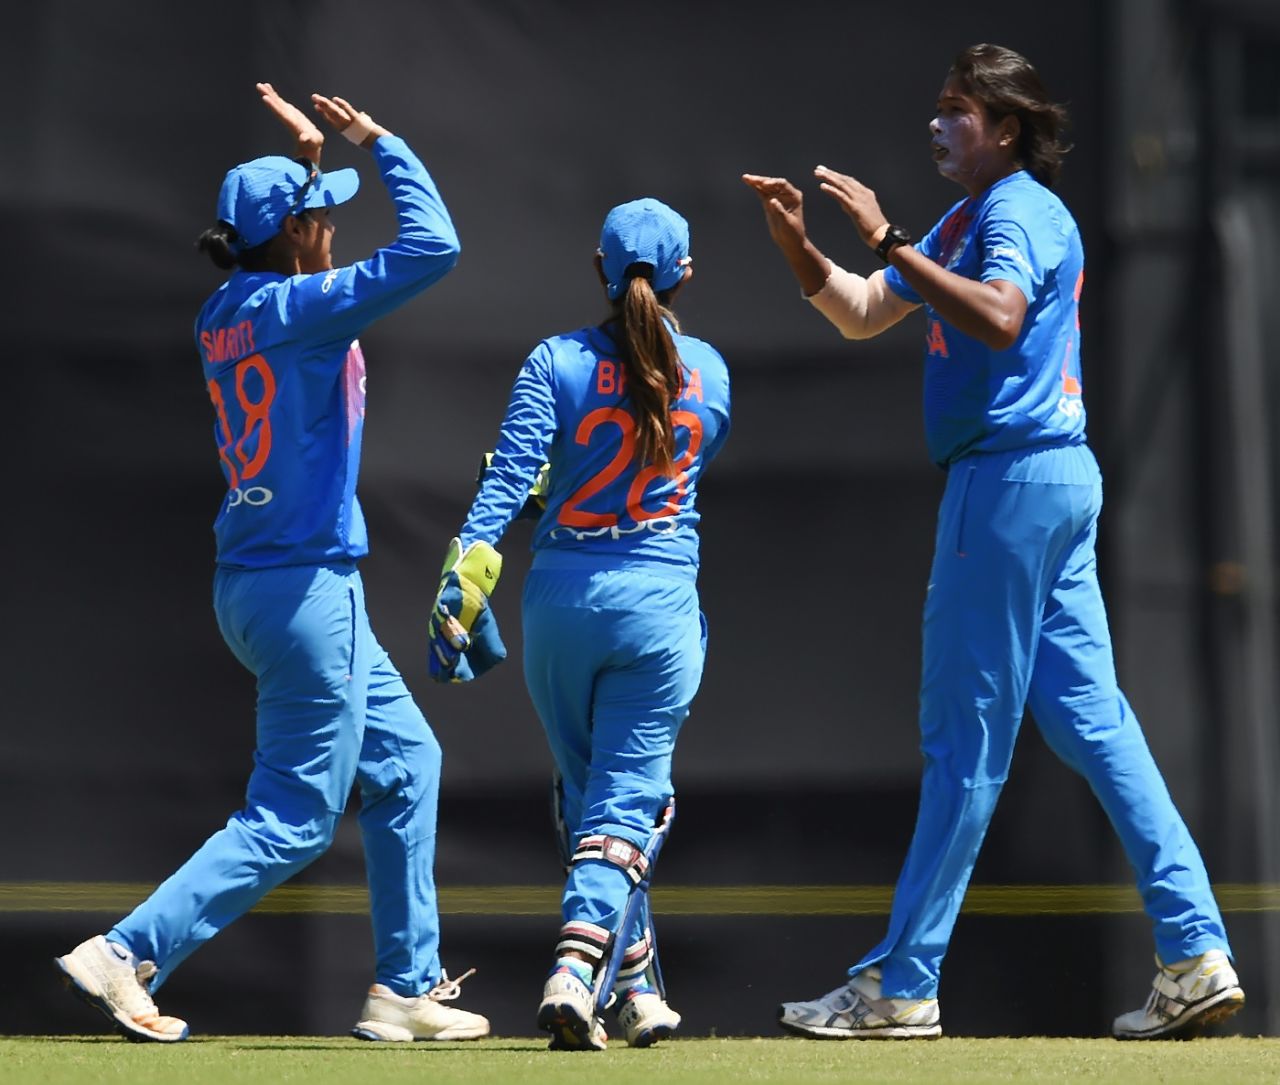 Jhulan Goswami dismissed Alyssa Healy in the first over, India v Australia, Tri-Nation Women's T20 Series, Mumbai, March 22, 2018 